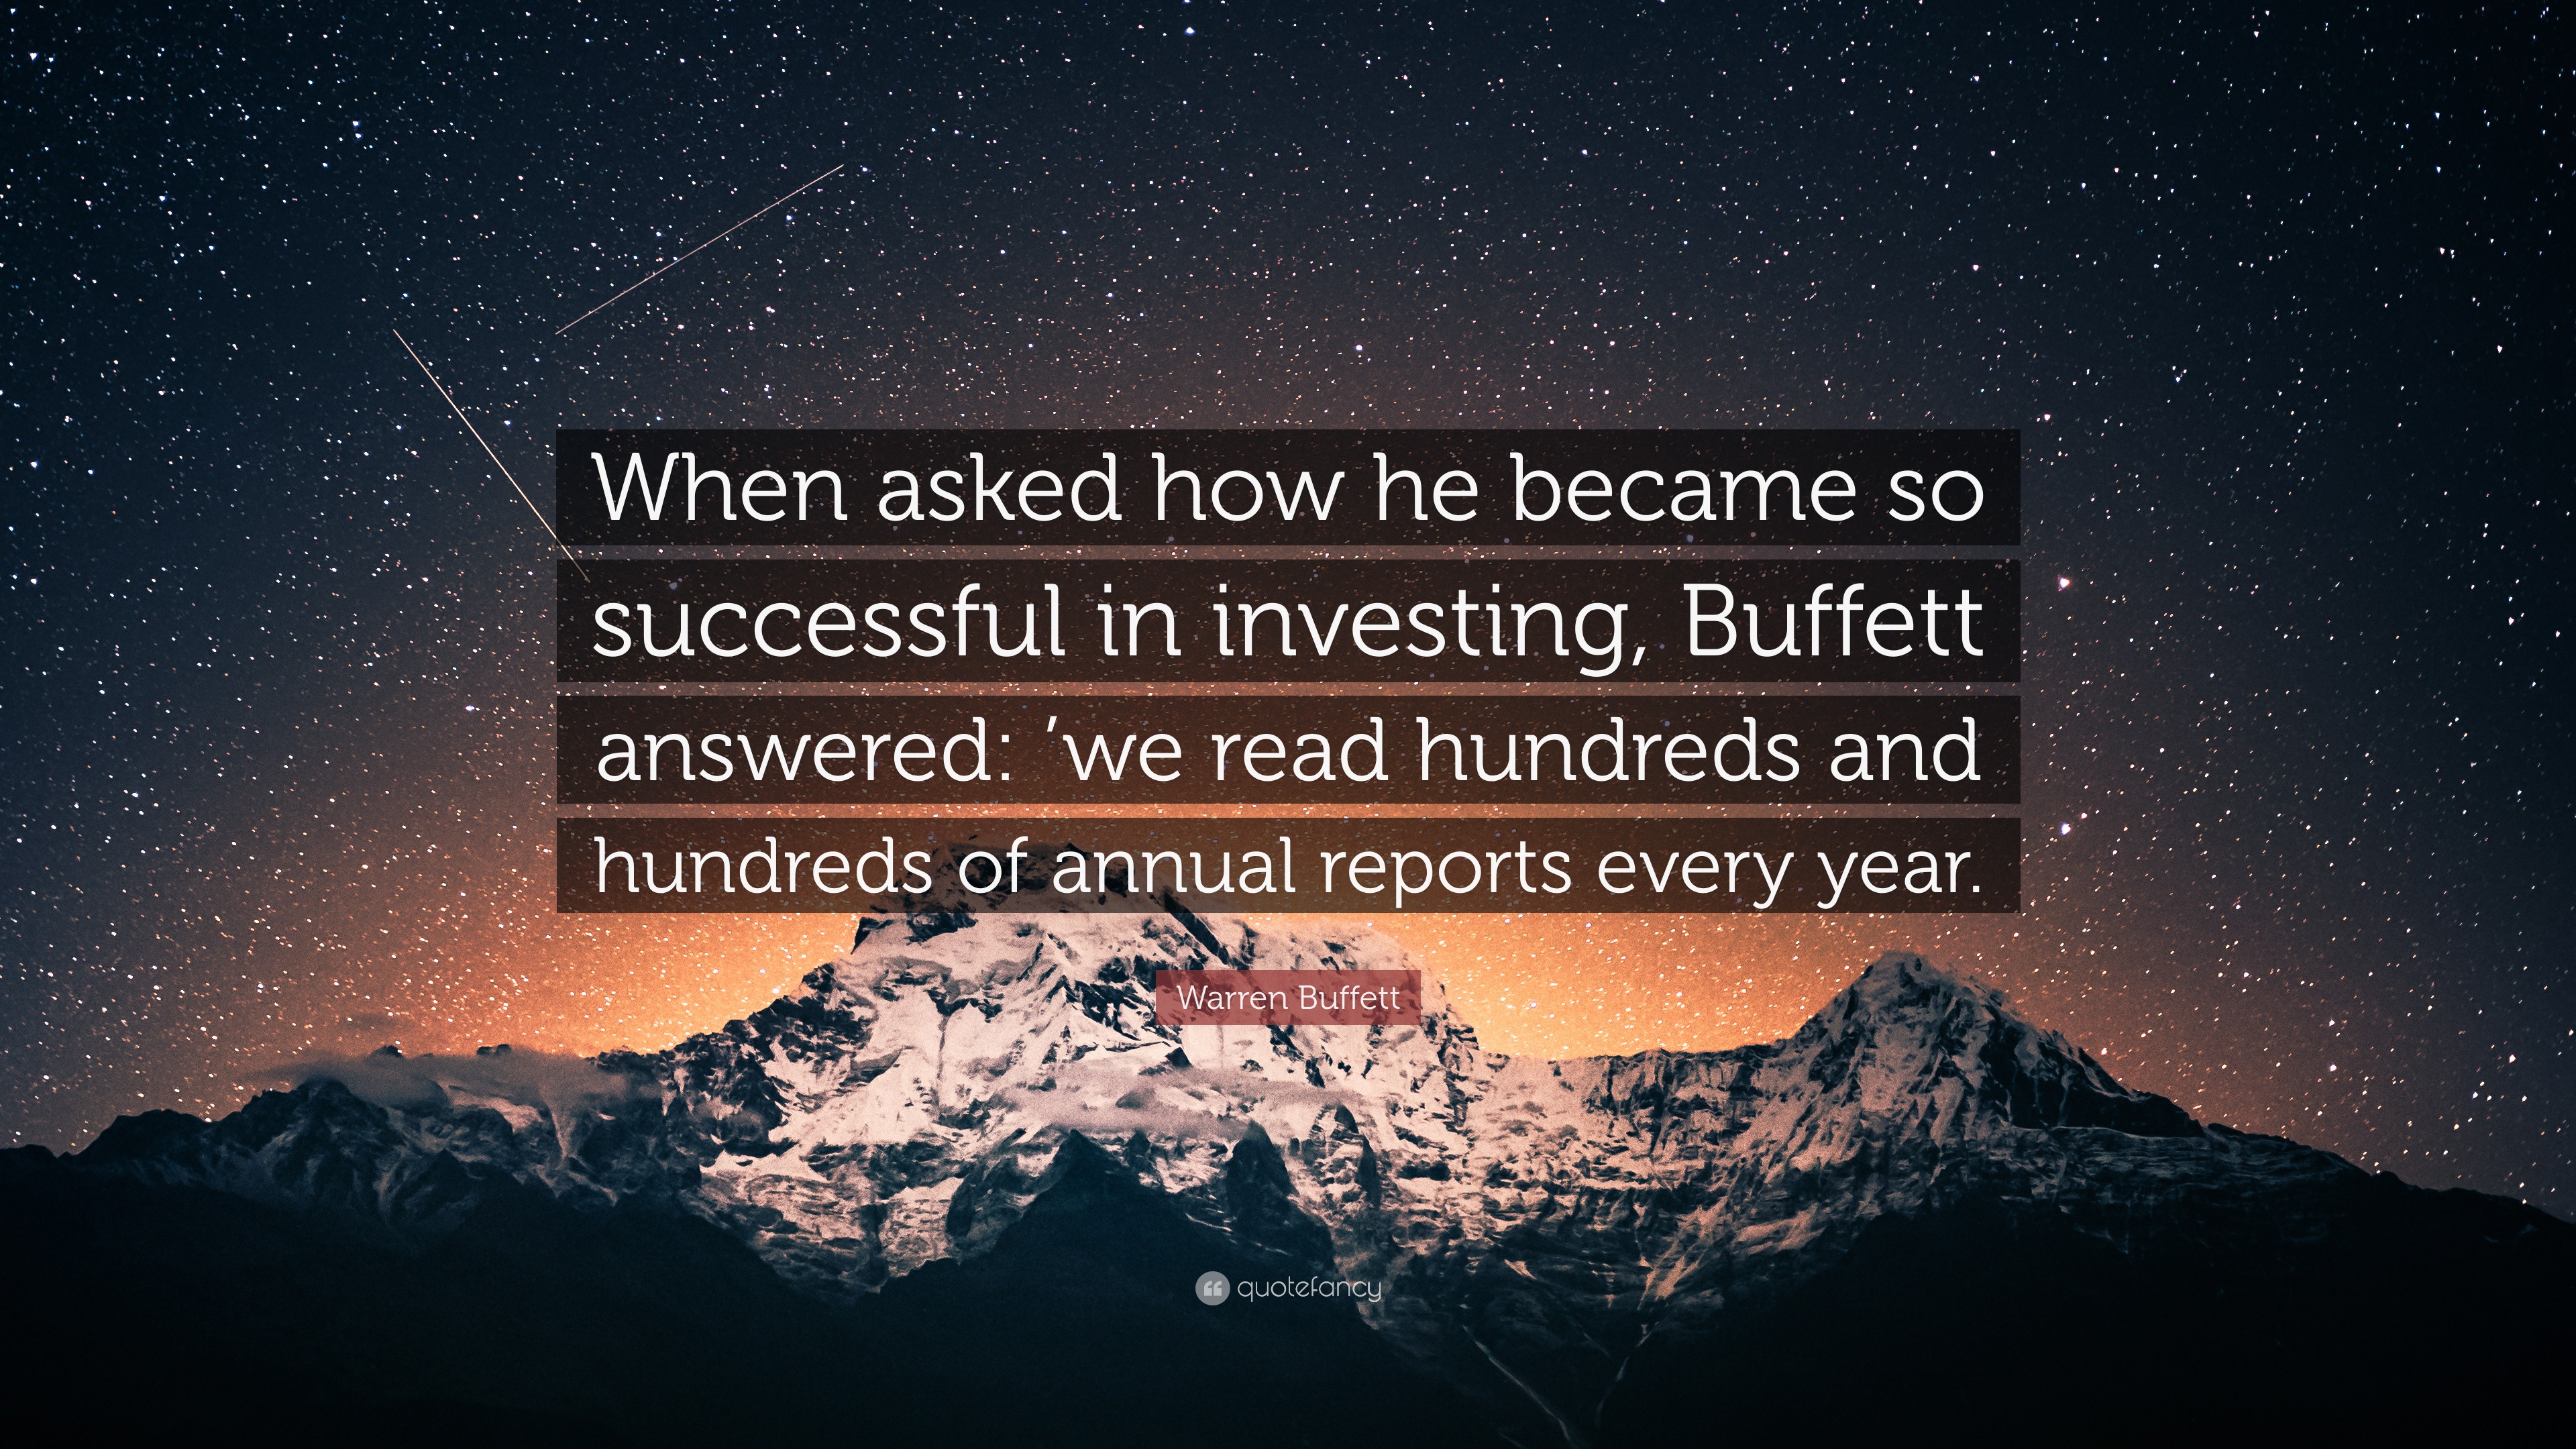 Warren Buffett Quote: “When asked how he became so successful in